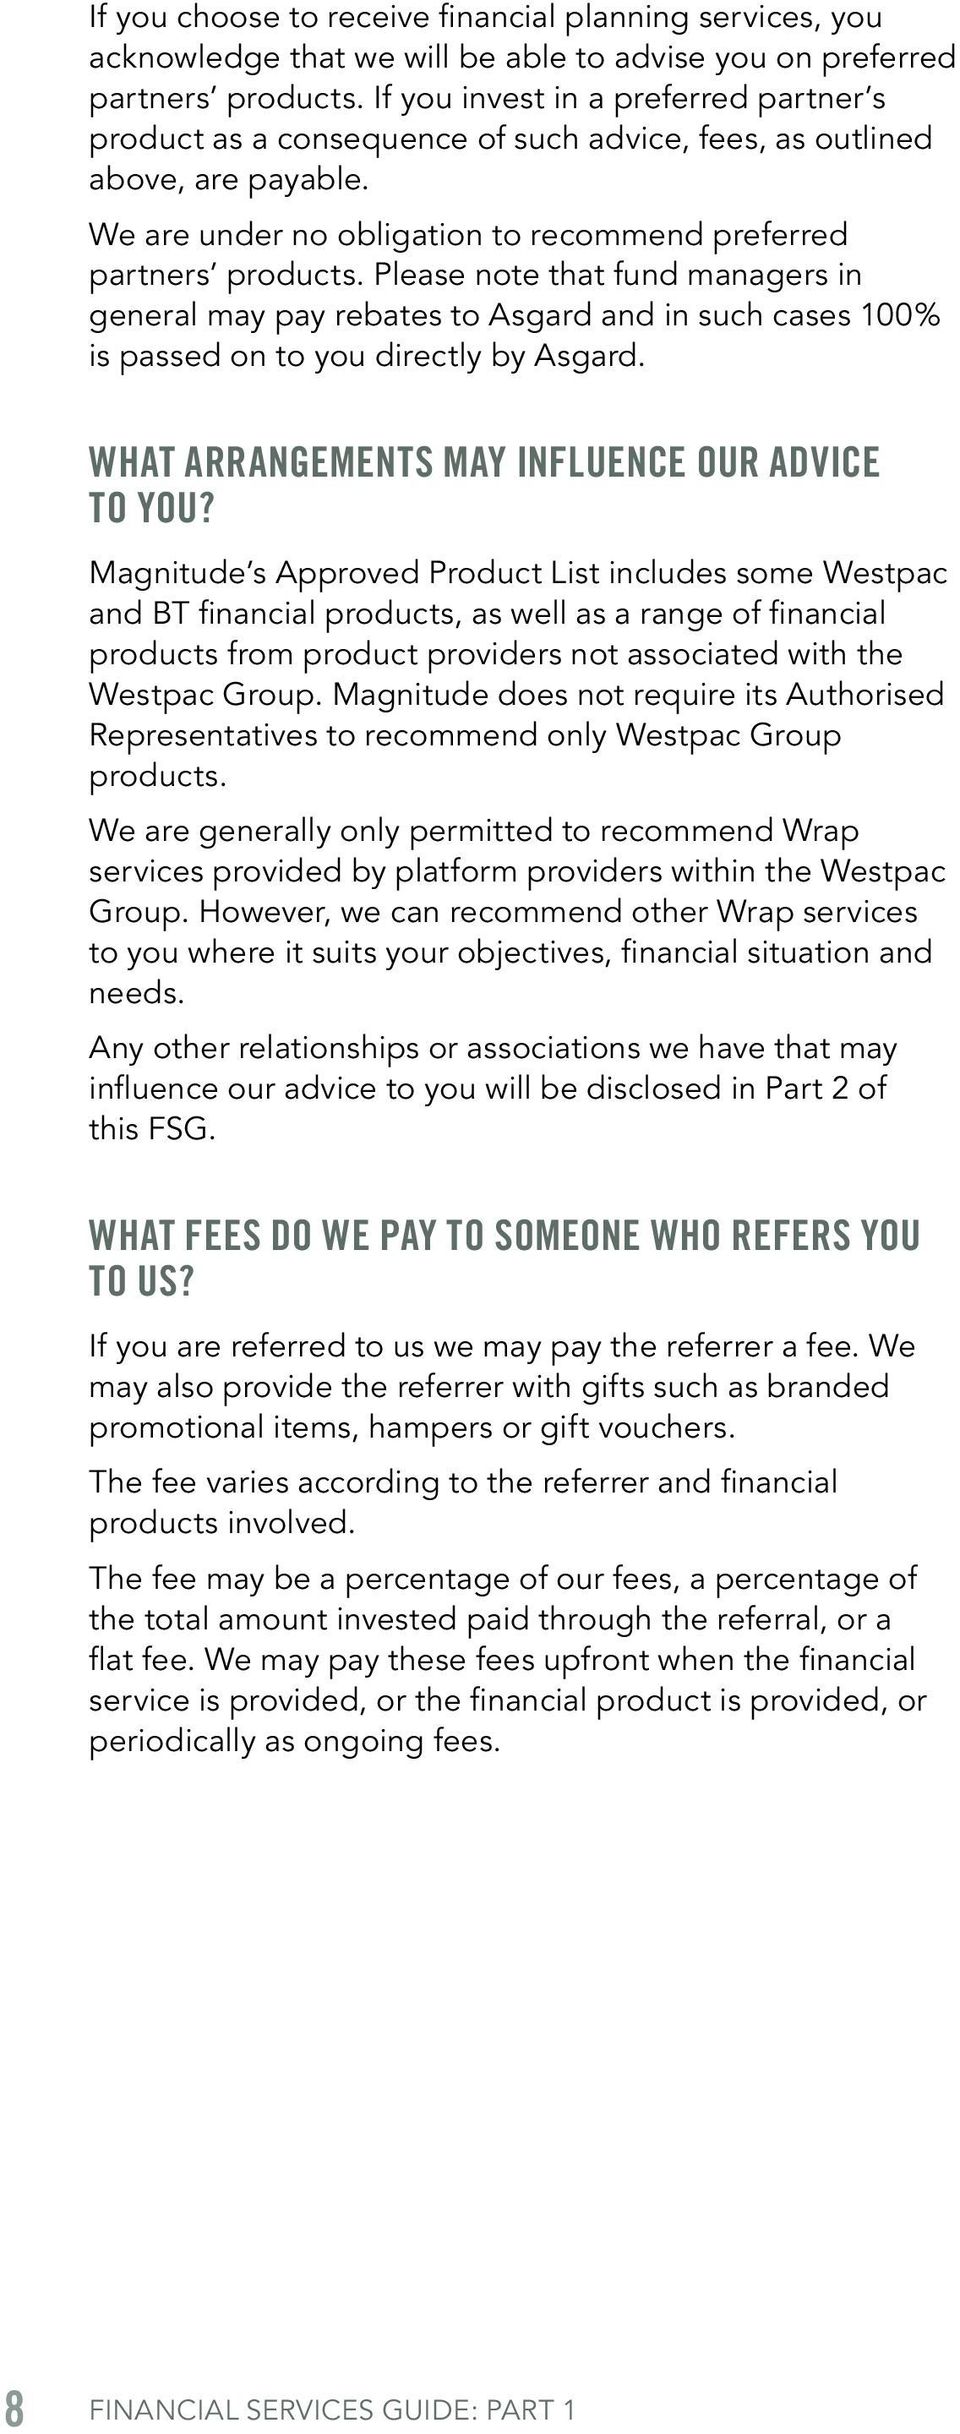 Please note that fund managers in general may pay rebates to Asgard and in such cases 100% is passed on to you directly by Asgard. WHAT ARRANGEMENTS MAY INFLUENCE OUR ADVICE TO YOU?